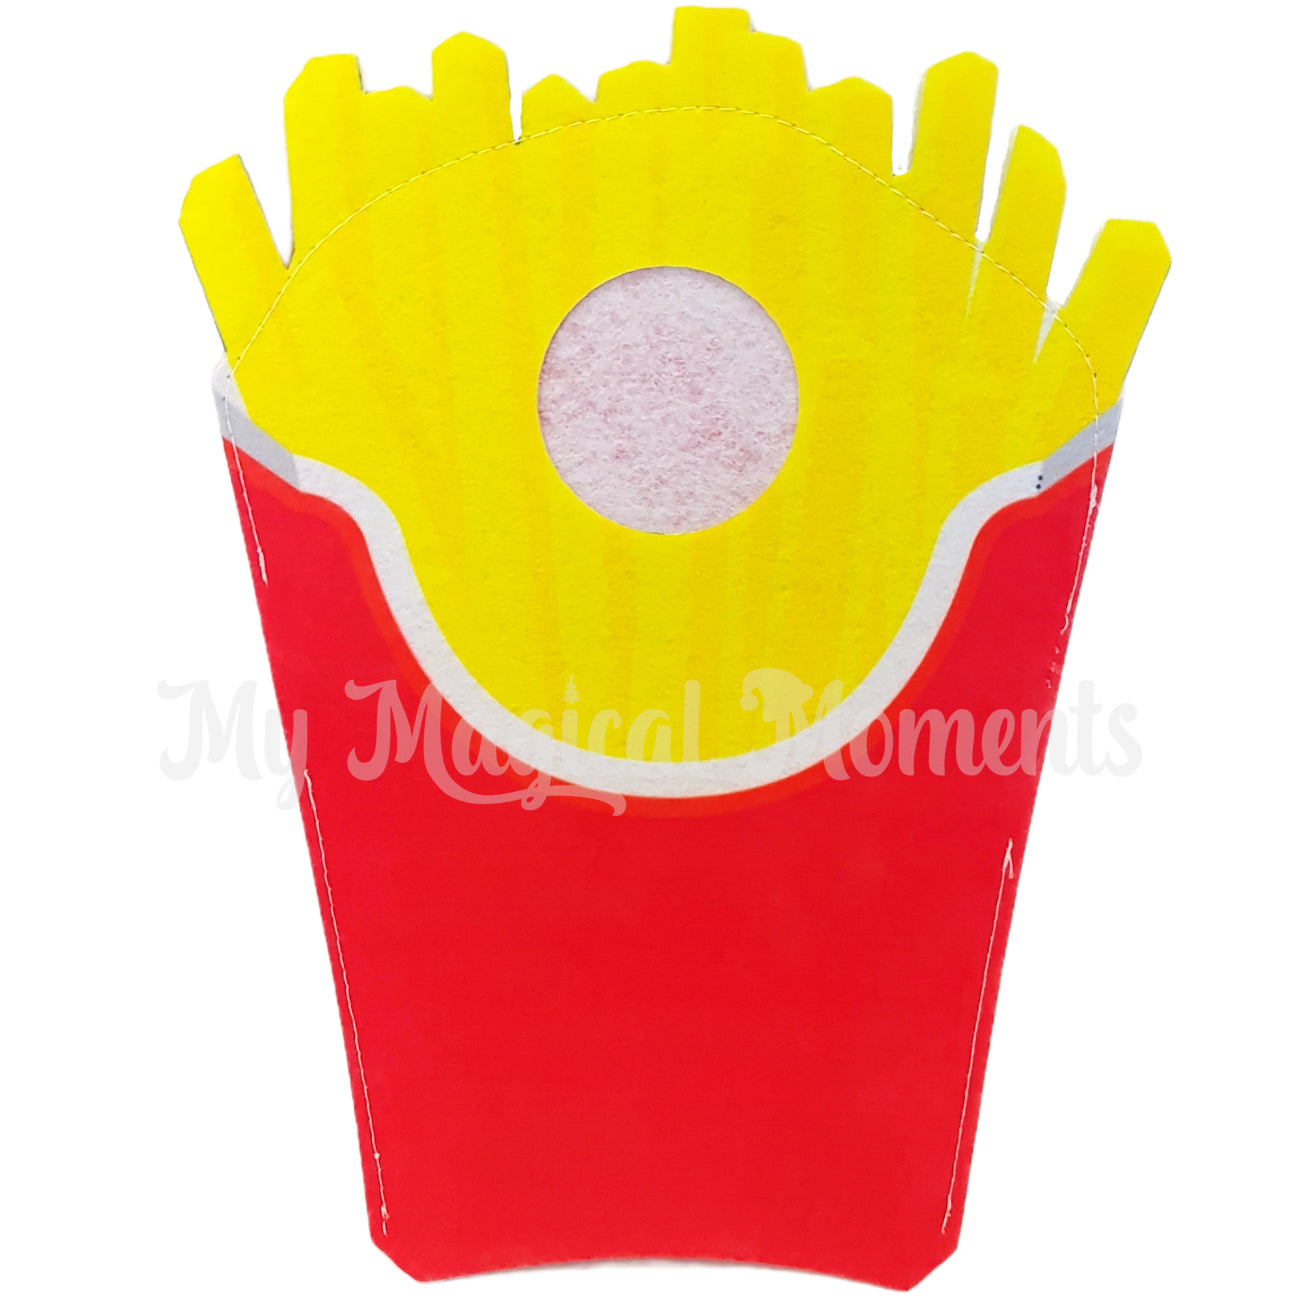 Elf french fries costume in red packet